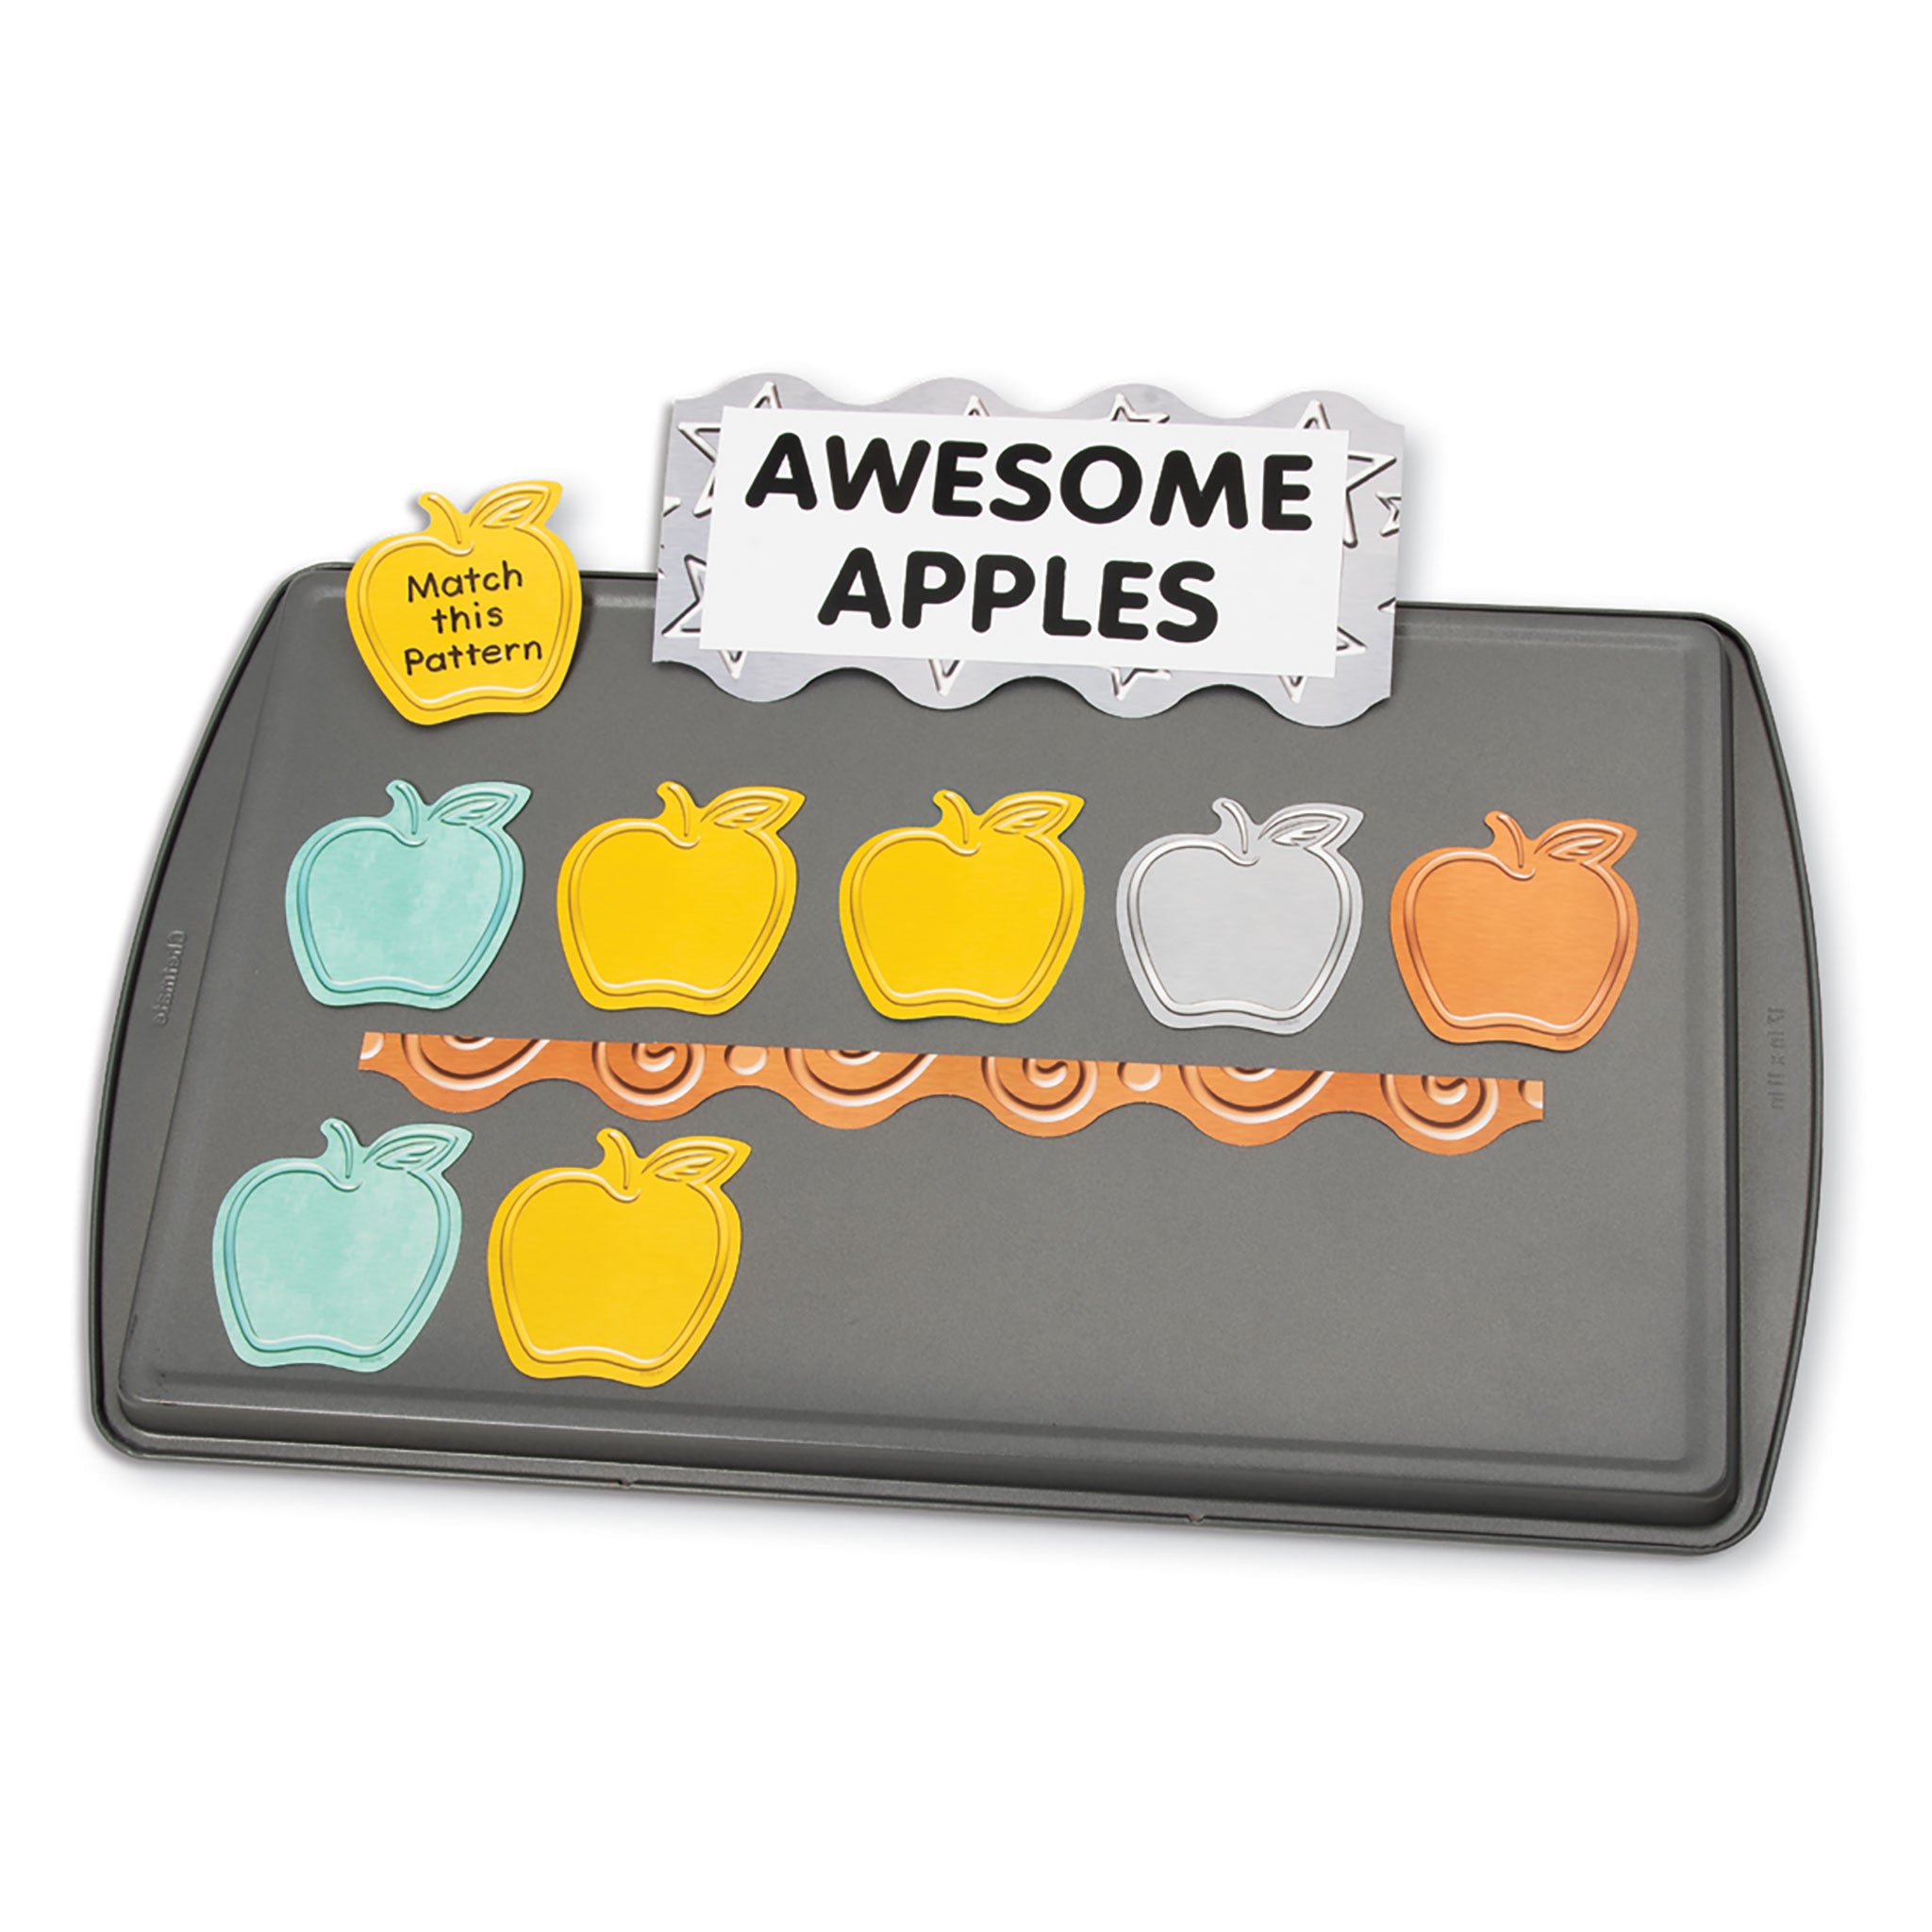 A1096 Awesome Apples Learning FUN Activity